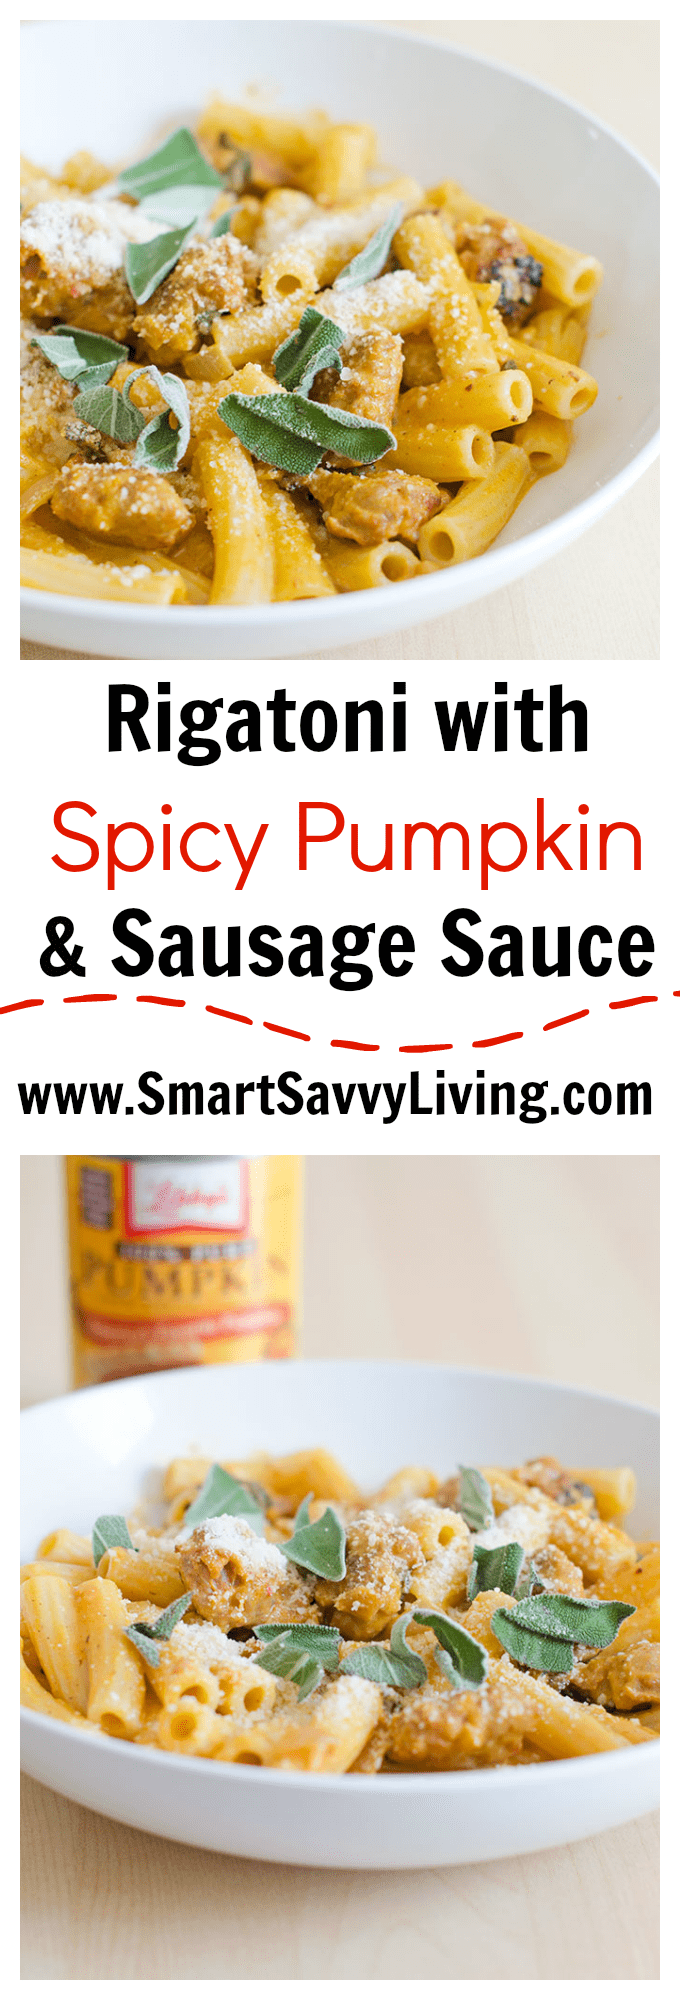 Looking for a savory pumpkin dinner recipe for fall? You'll love this Rigatoni with Spicy Pumpkin and Sausage Sauce Recipe. In fact, I love it all year long!